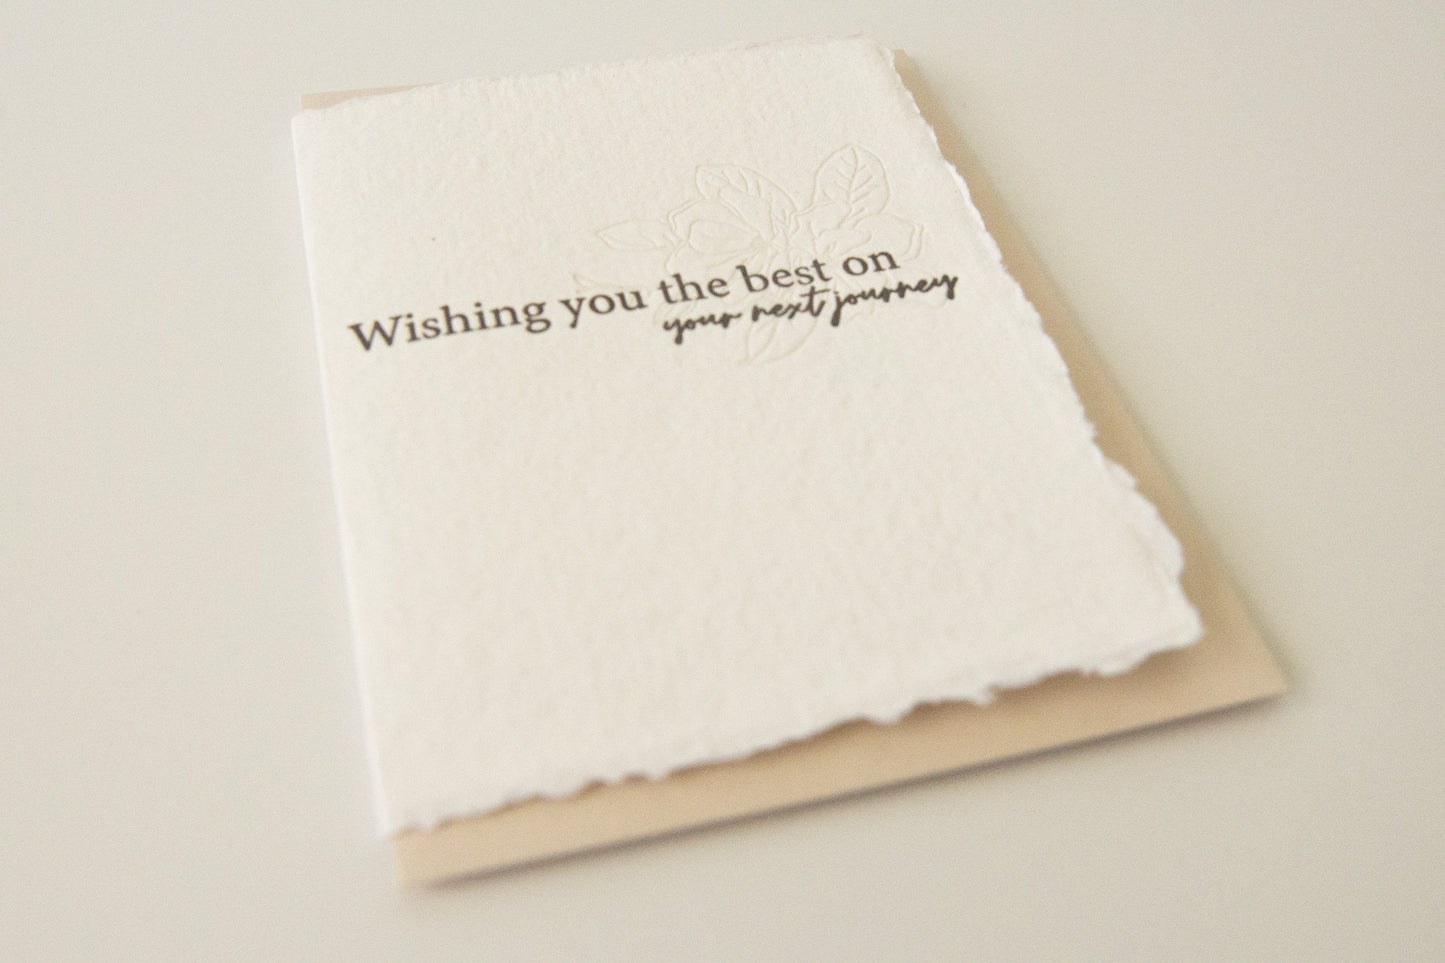 Wishing You the Best on Your Next Journey Greeting Card